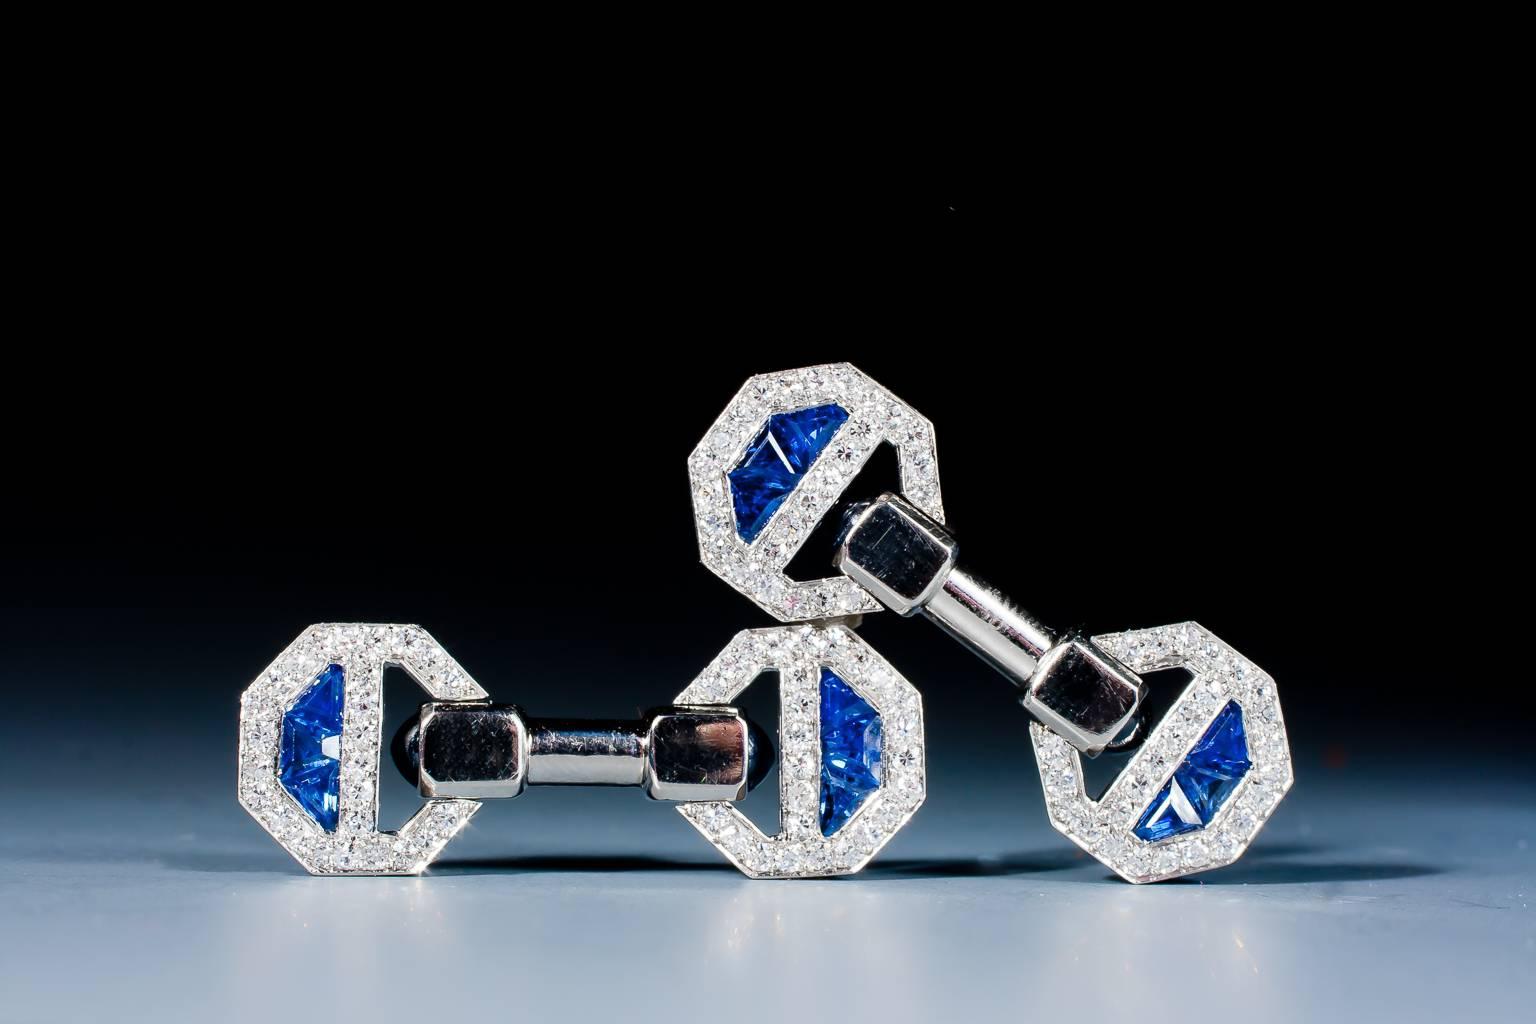 A rare and magnificent pair of Art Deco sapphire and diamond cufflinks by Cartier, designed as flexible octagonal panels, set with cabochon cut and calibré cut sapphires and round cut diamonds, mounted in platinum and gold.
Signed CARTIER and